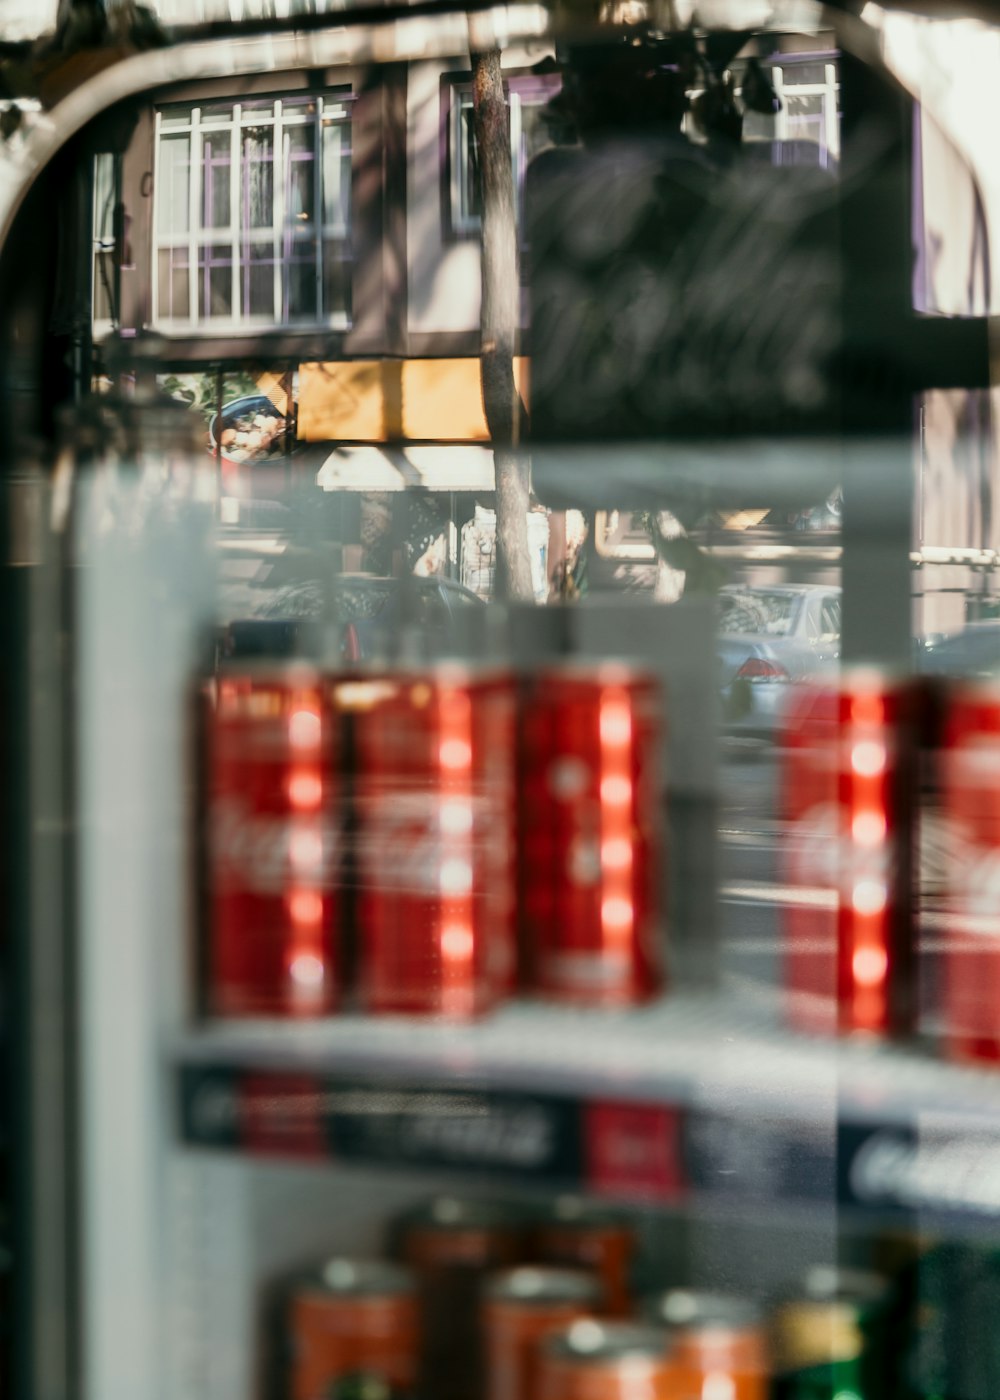 Coca-Cola cans in glass display during daytime